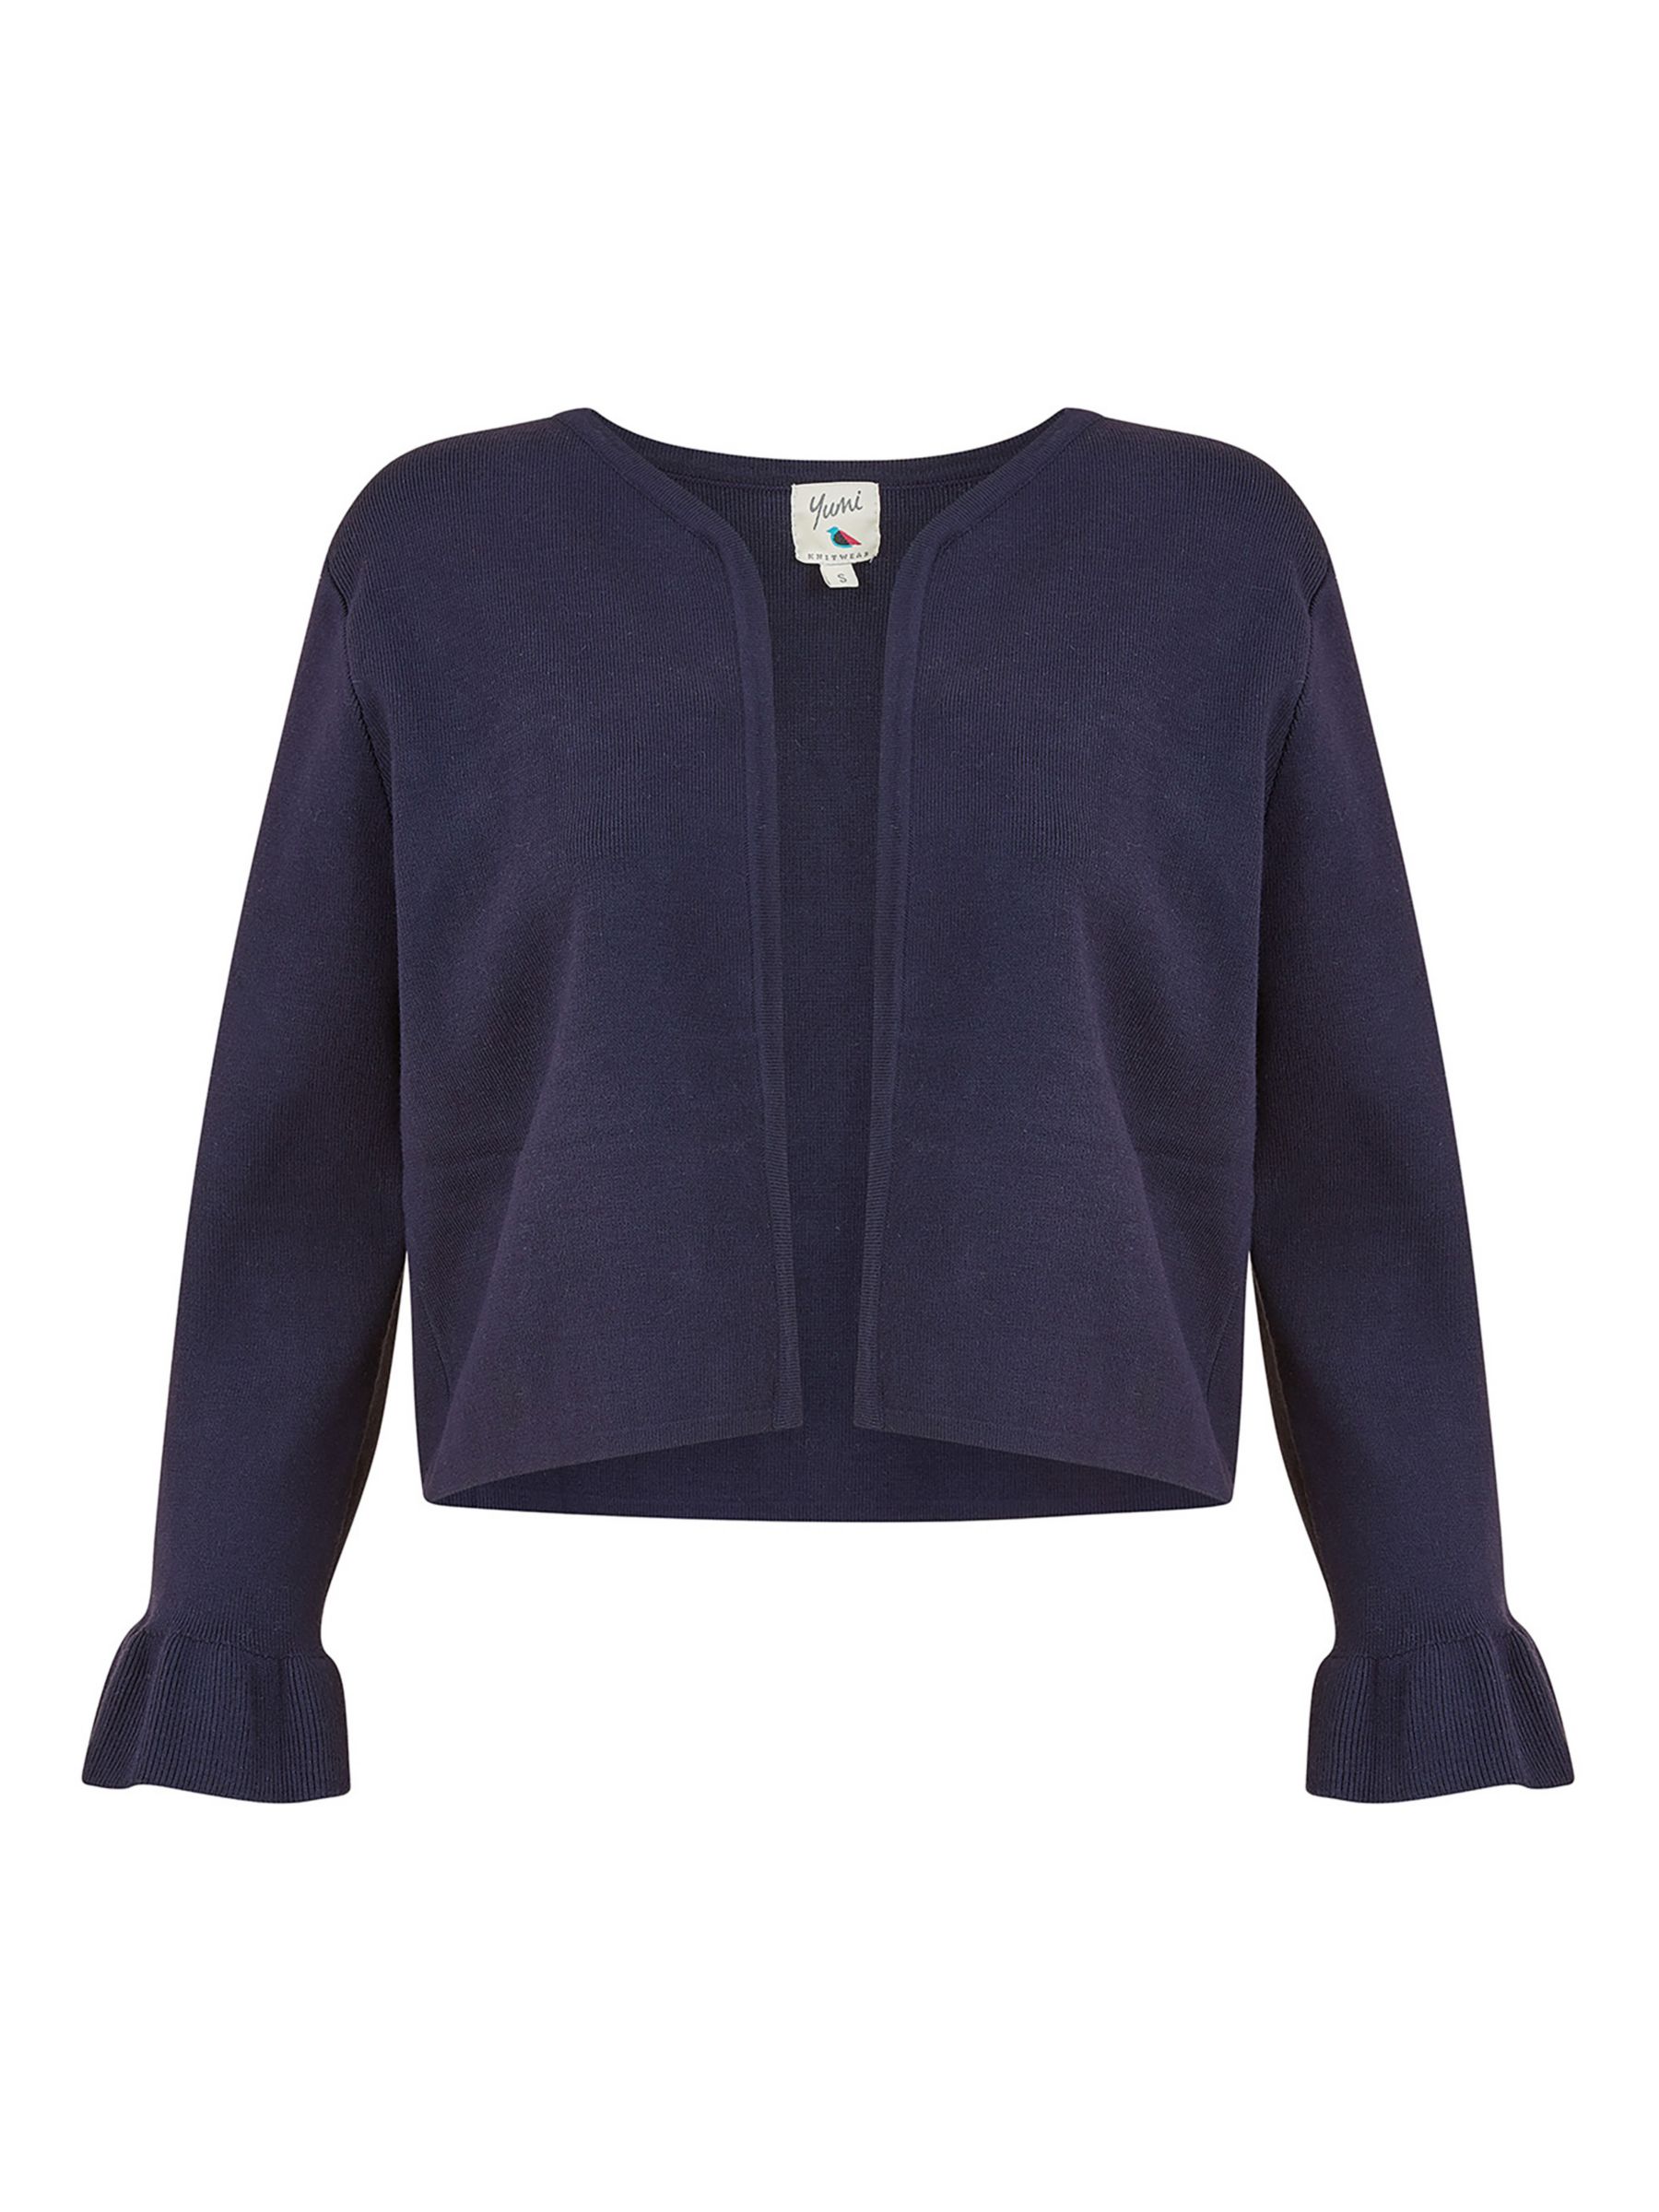 Yumi Bell Sleeve Cropped Cardigan, Navy, S